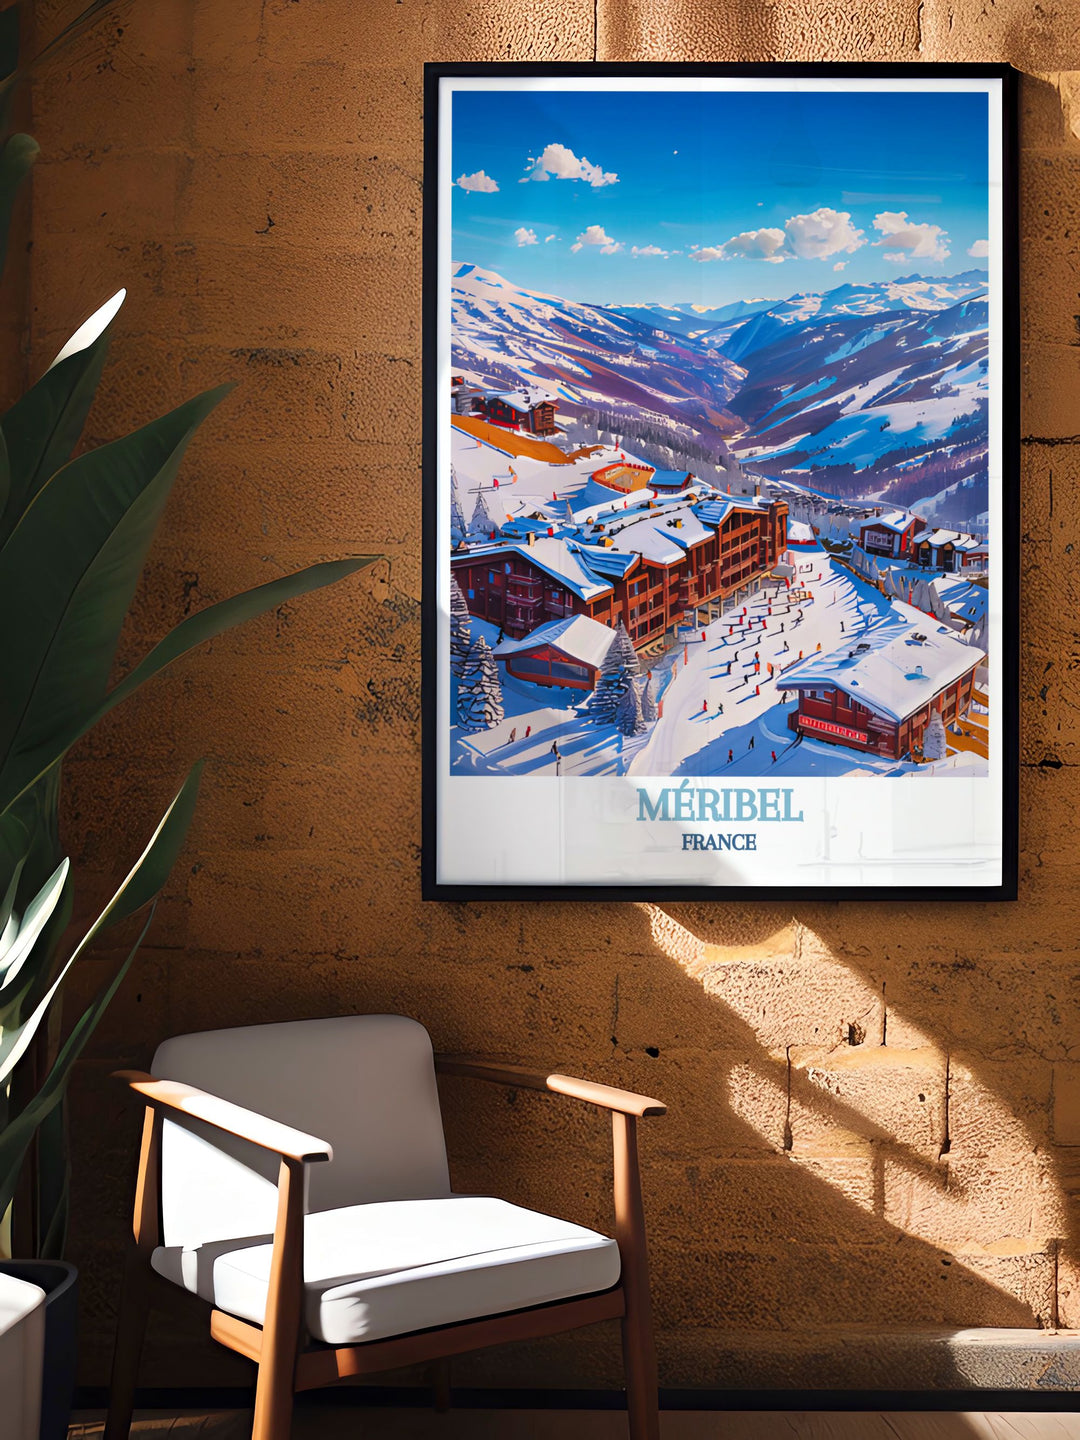 This detailed poster of Méribel illustrates the vibrant snowboarding culture and well groomed slopes, making it an excellent addition to any art collection celebrating winter sports.